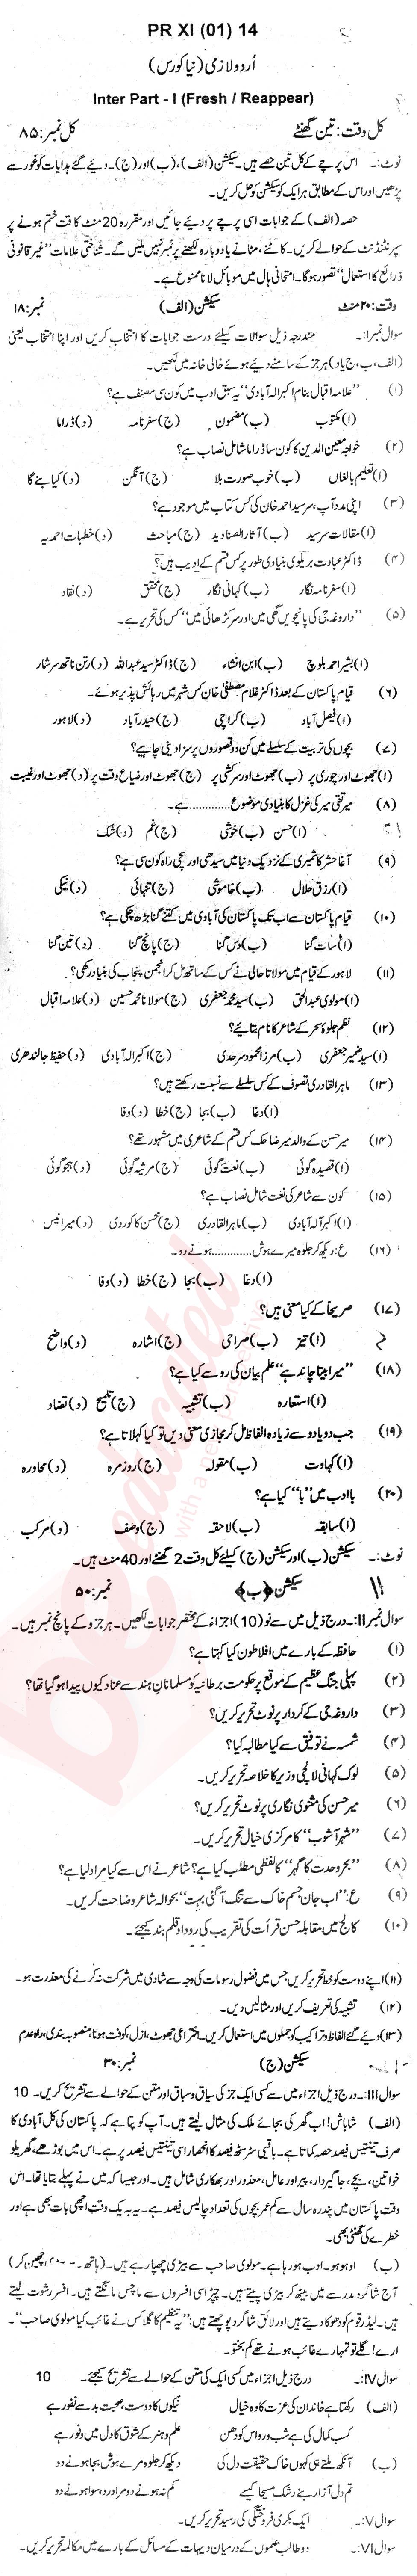 Urdu 11th class Past Paper Group 1 BISE Abbottabad 2014